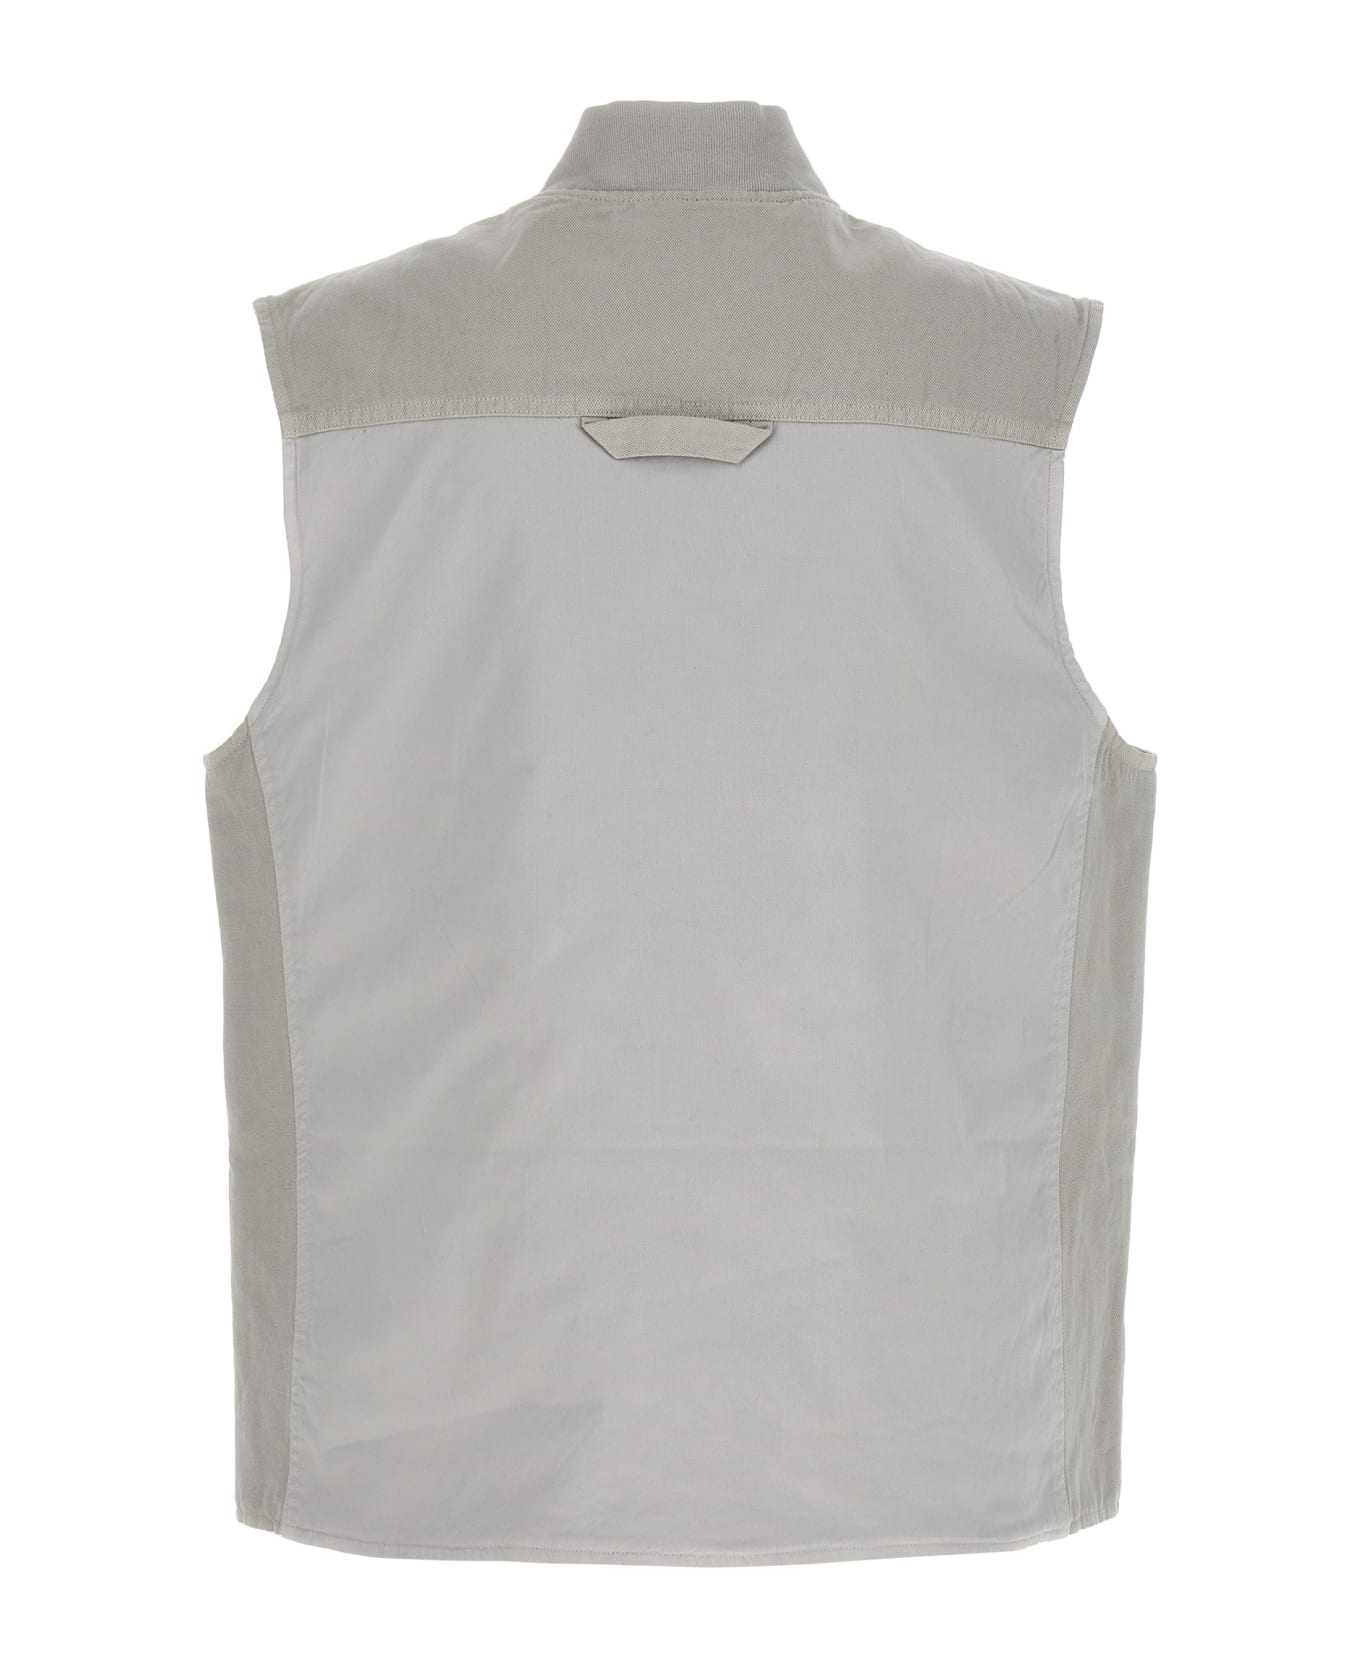 Objects Iv Life Canvas Vest - Gray